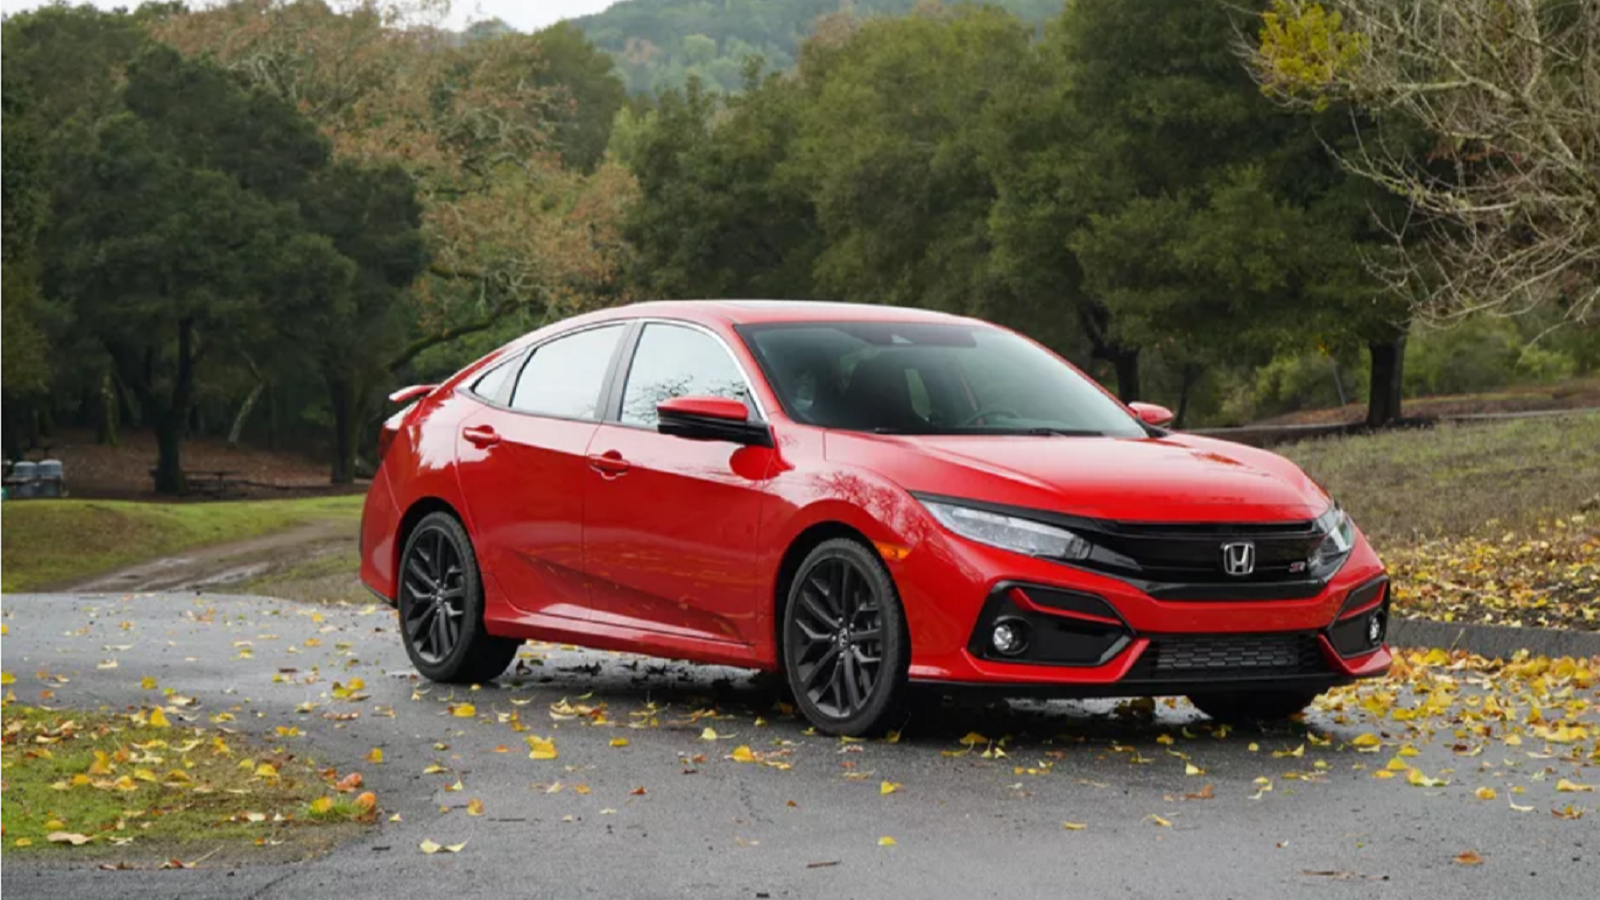 The 2018 Honda Civic Type R is a very capable daily driver - CNET